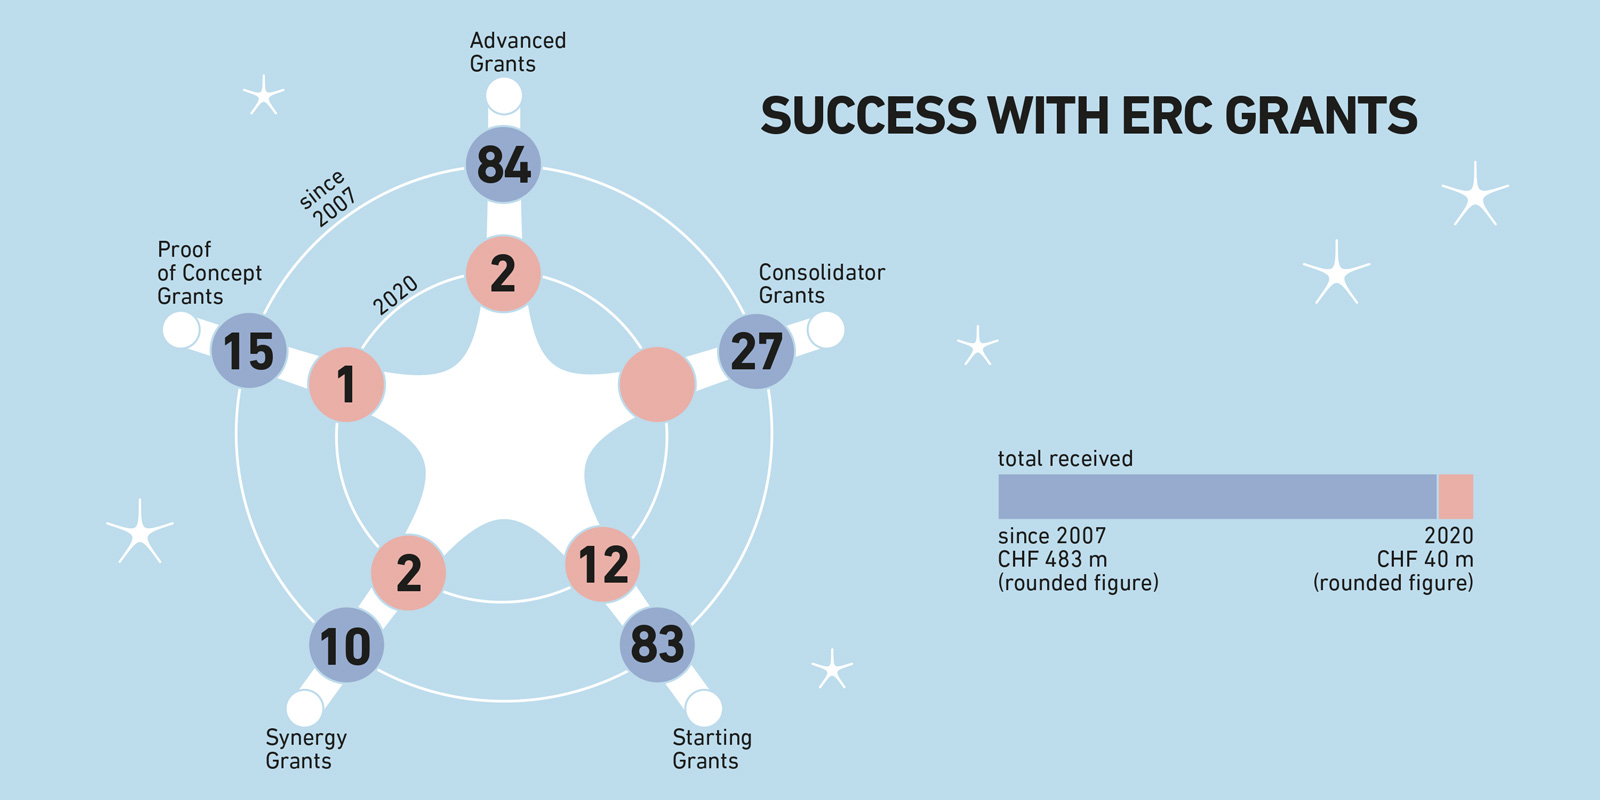 Enlarged view: Success with ERC Grants